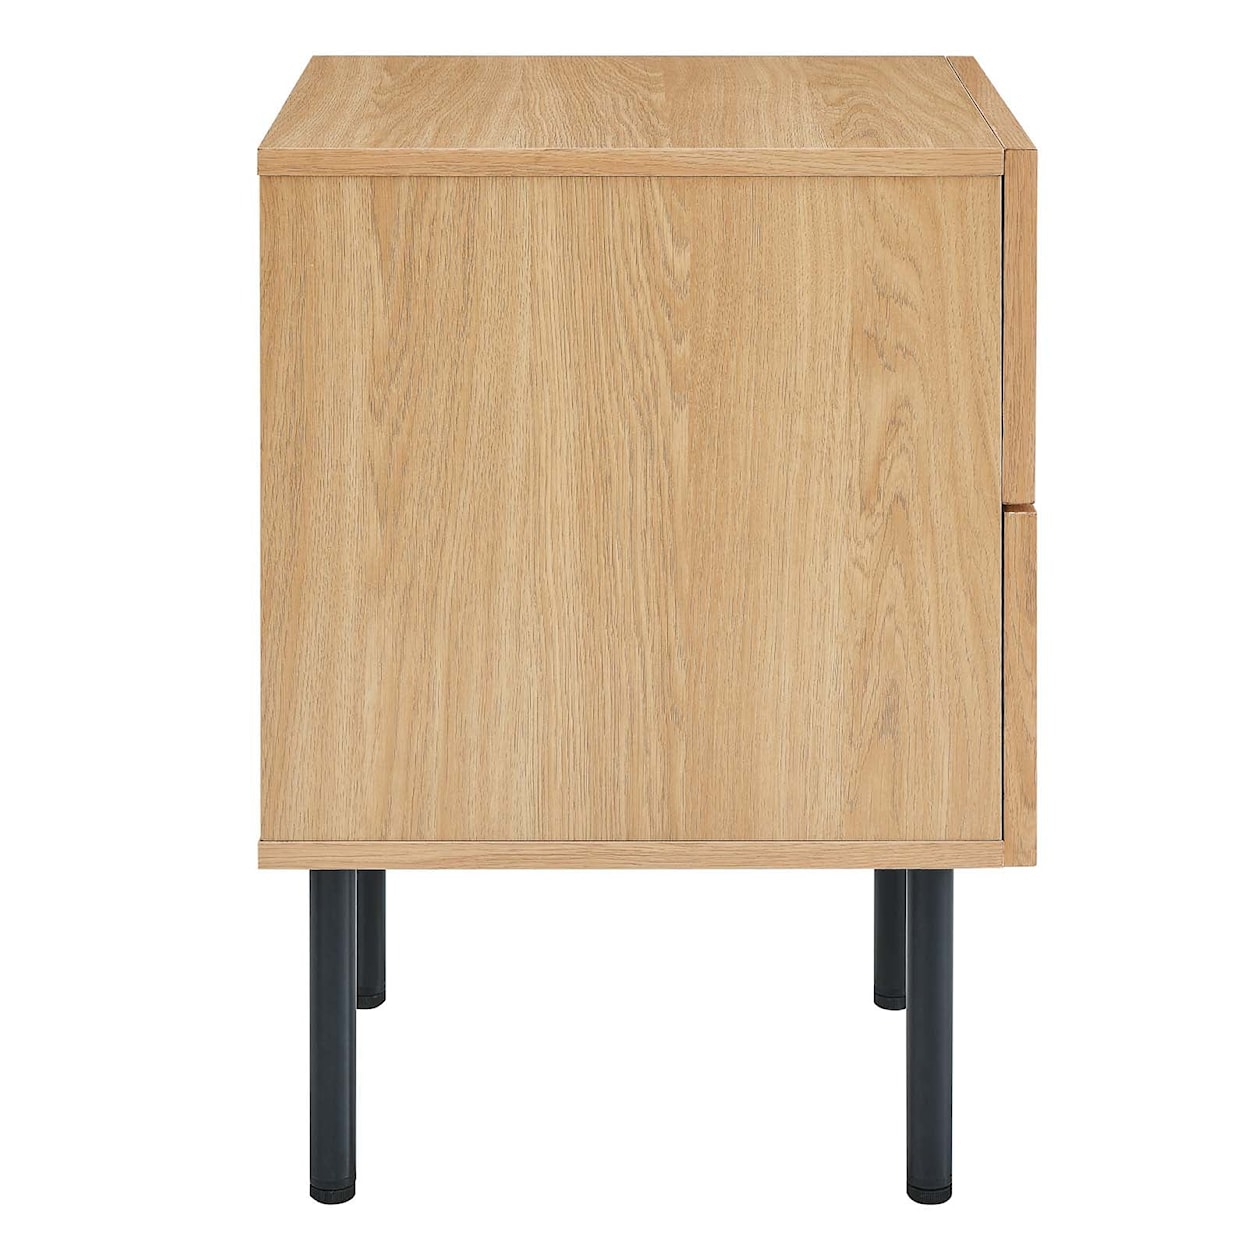 Modway Chaucer 2-Drawer Nightstand